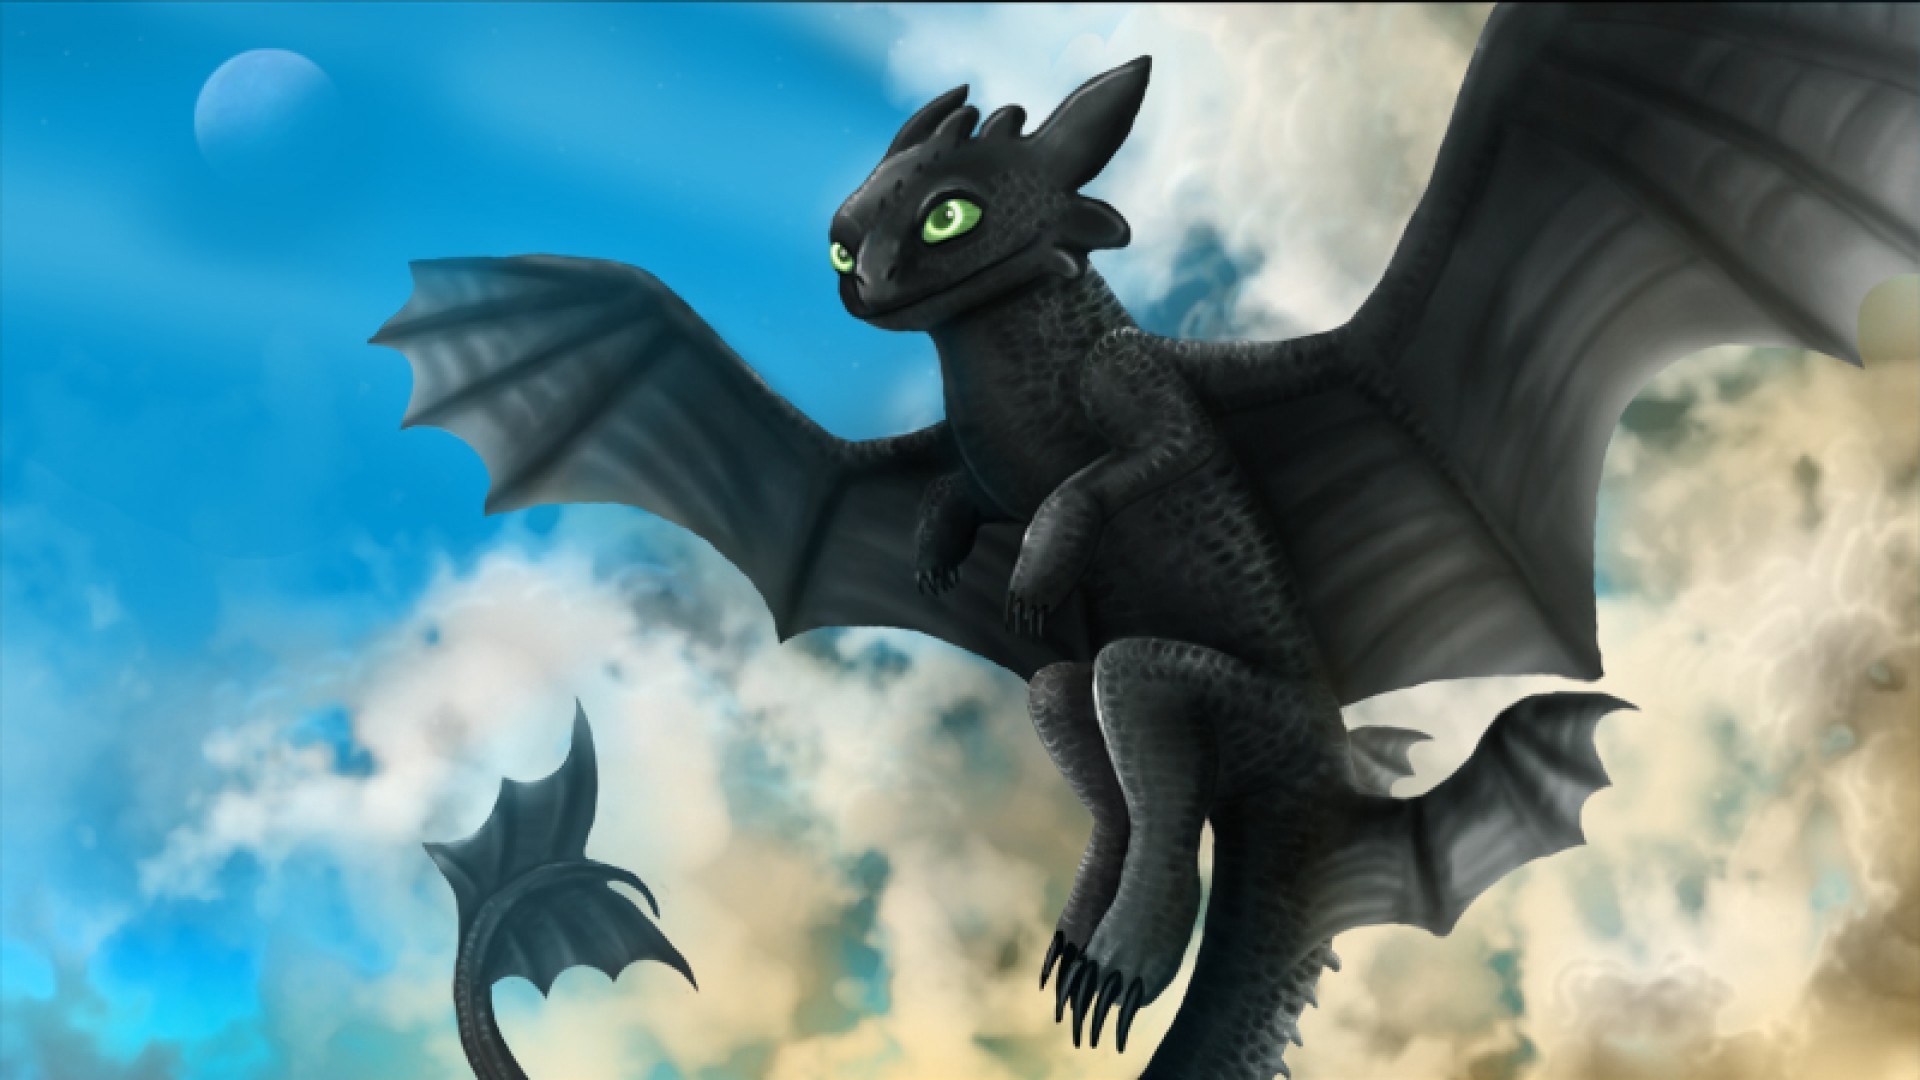 1920x1080 ... Cool Pictures Of Toothless Wallpaper These are High Quality and High  Definition HD Wallpapers For PC